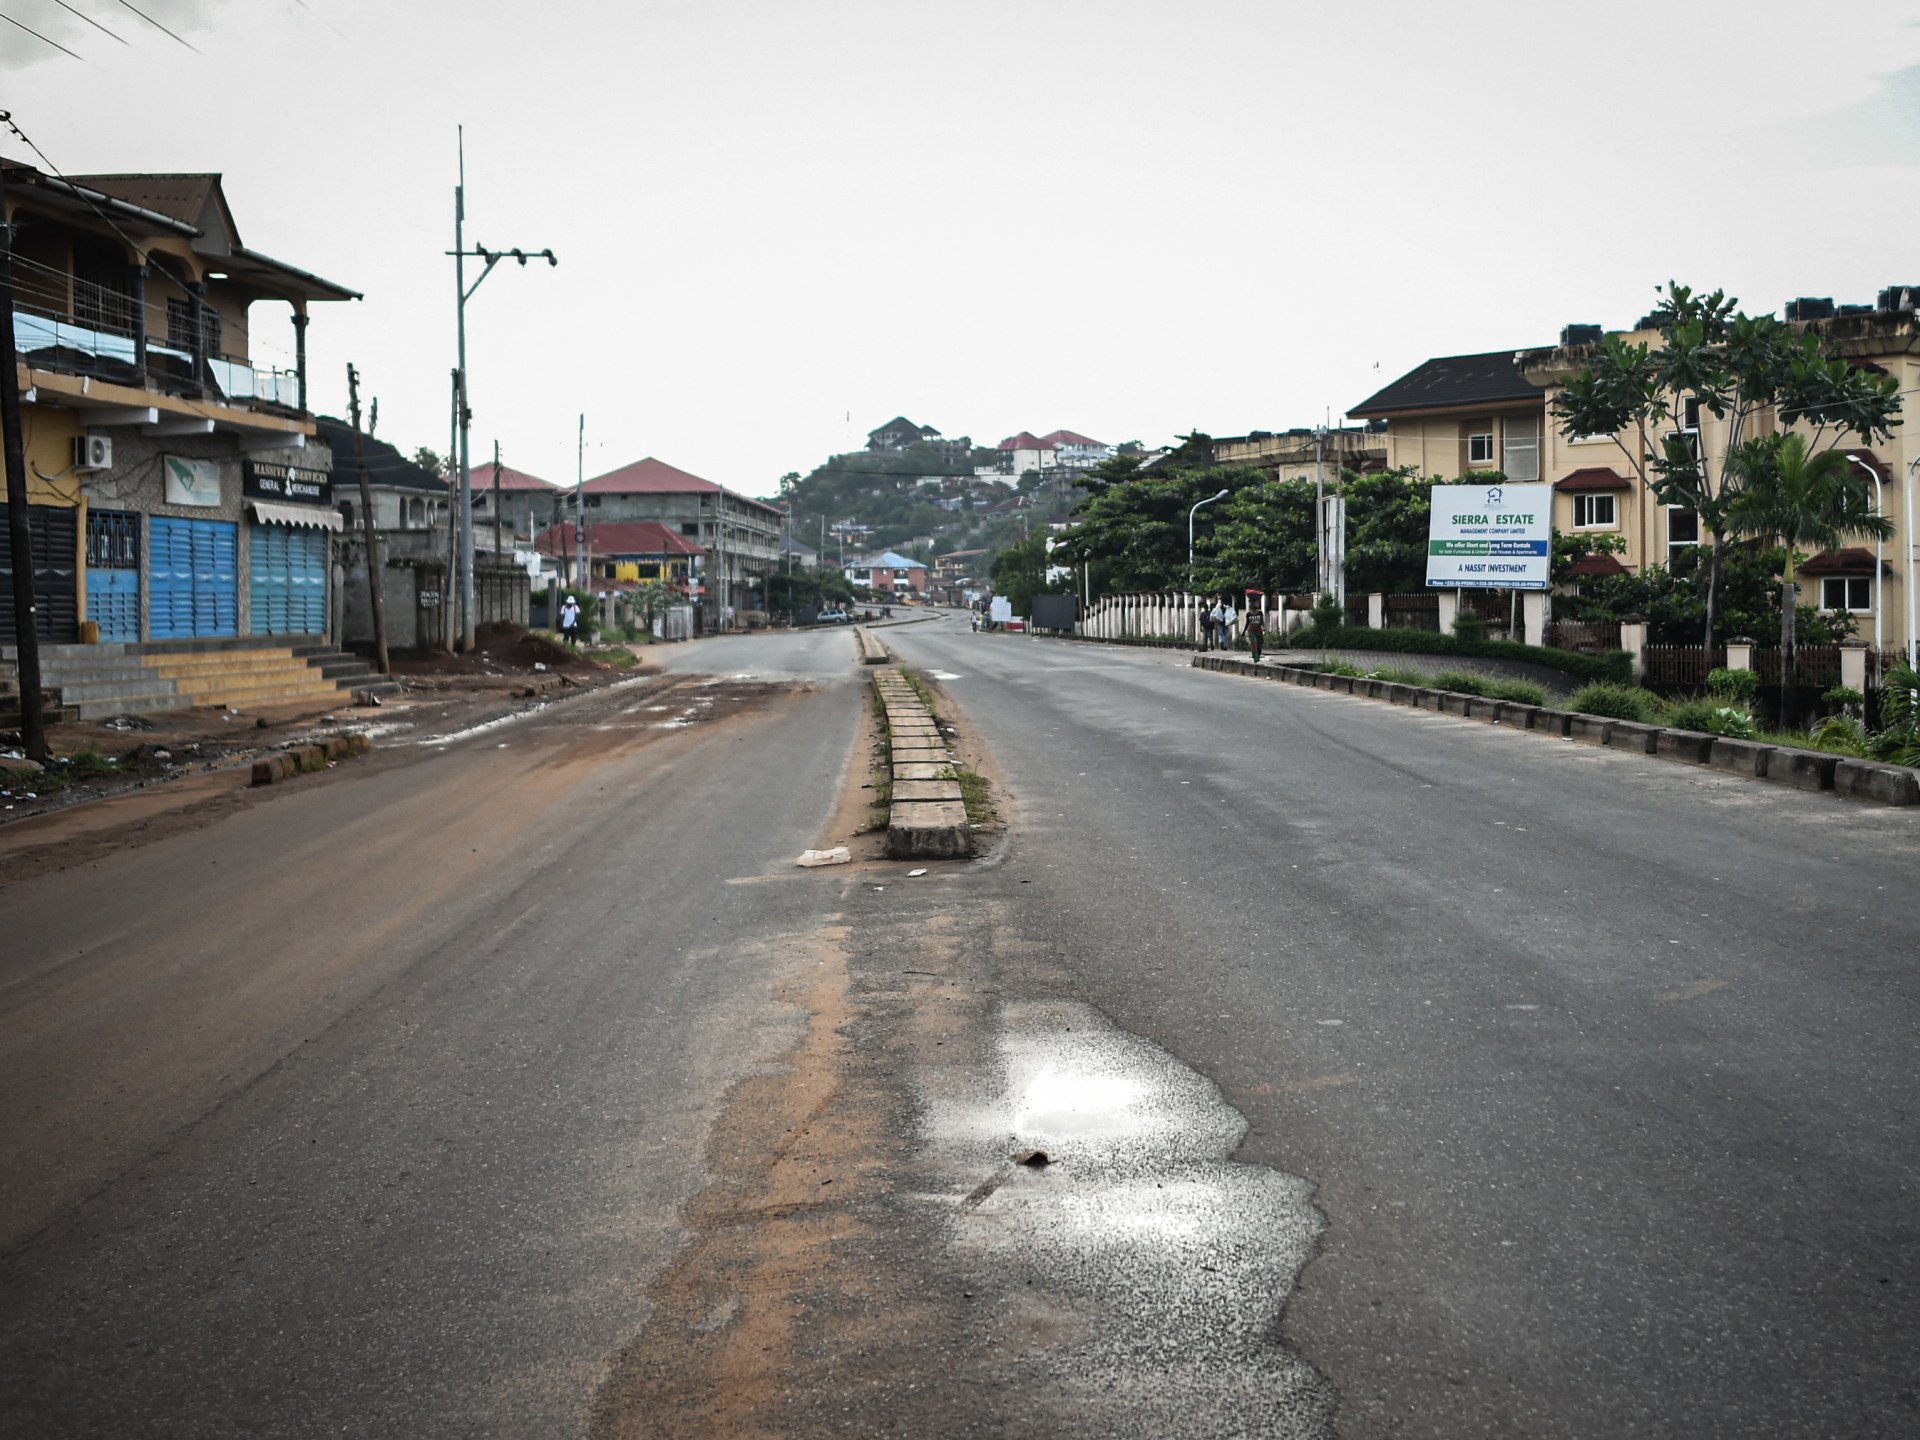 Sierra Leone imposes nationwide curfew after military barracks attacked | Military News